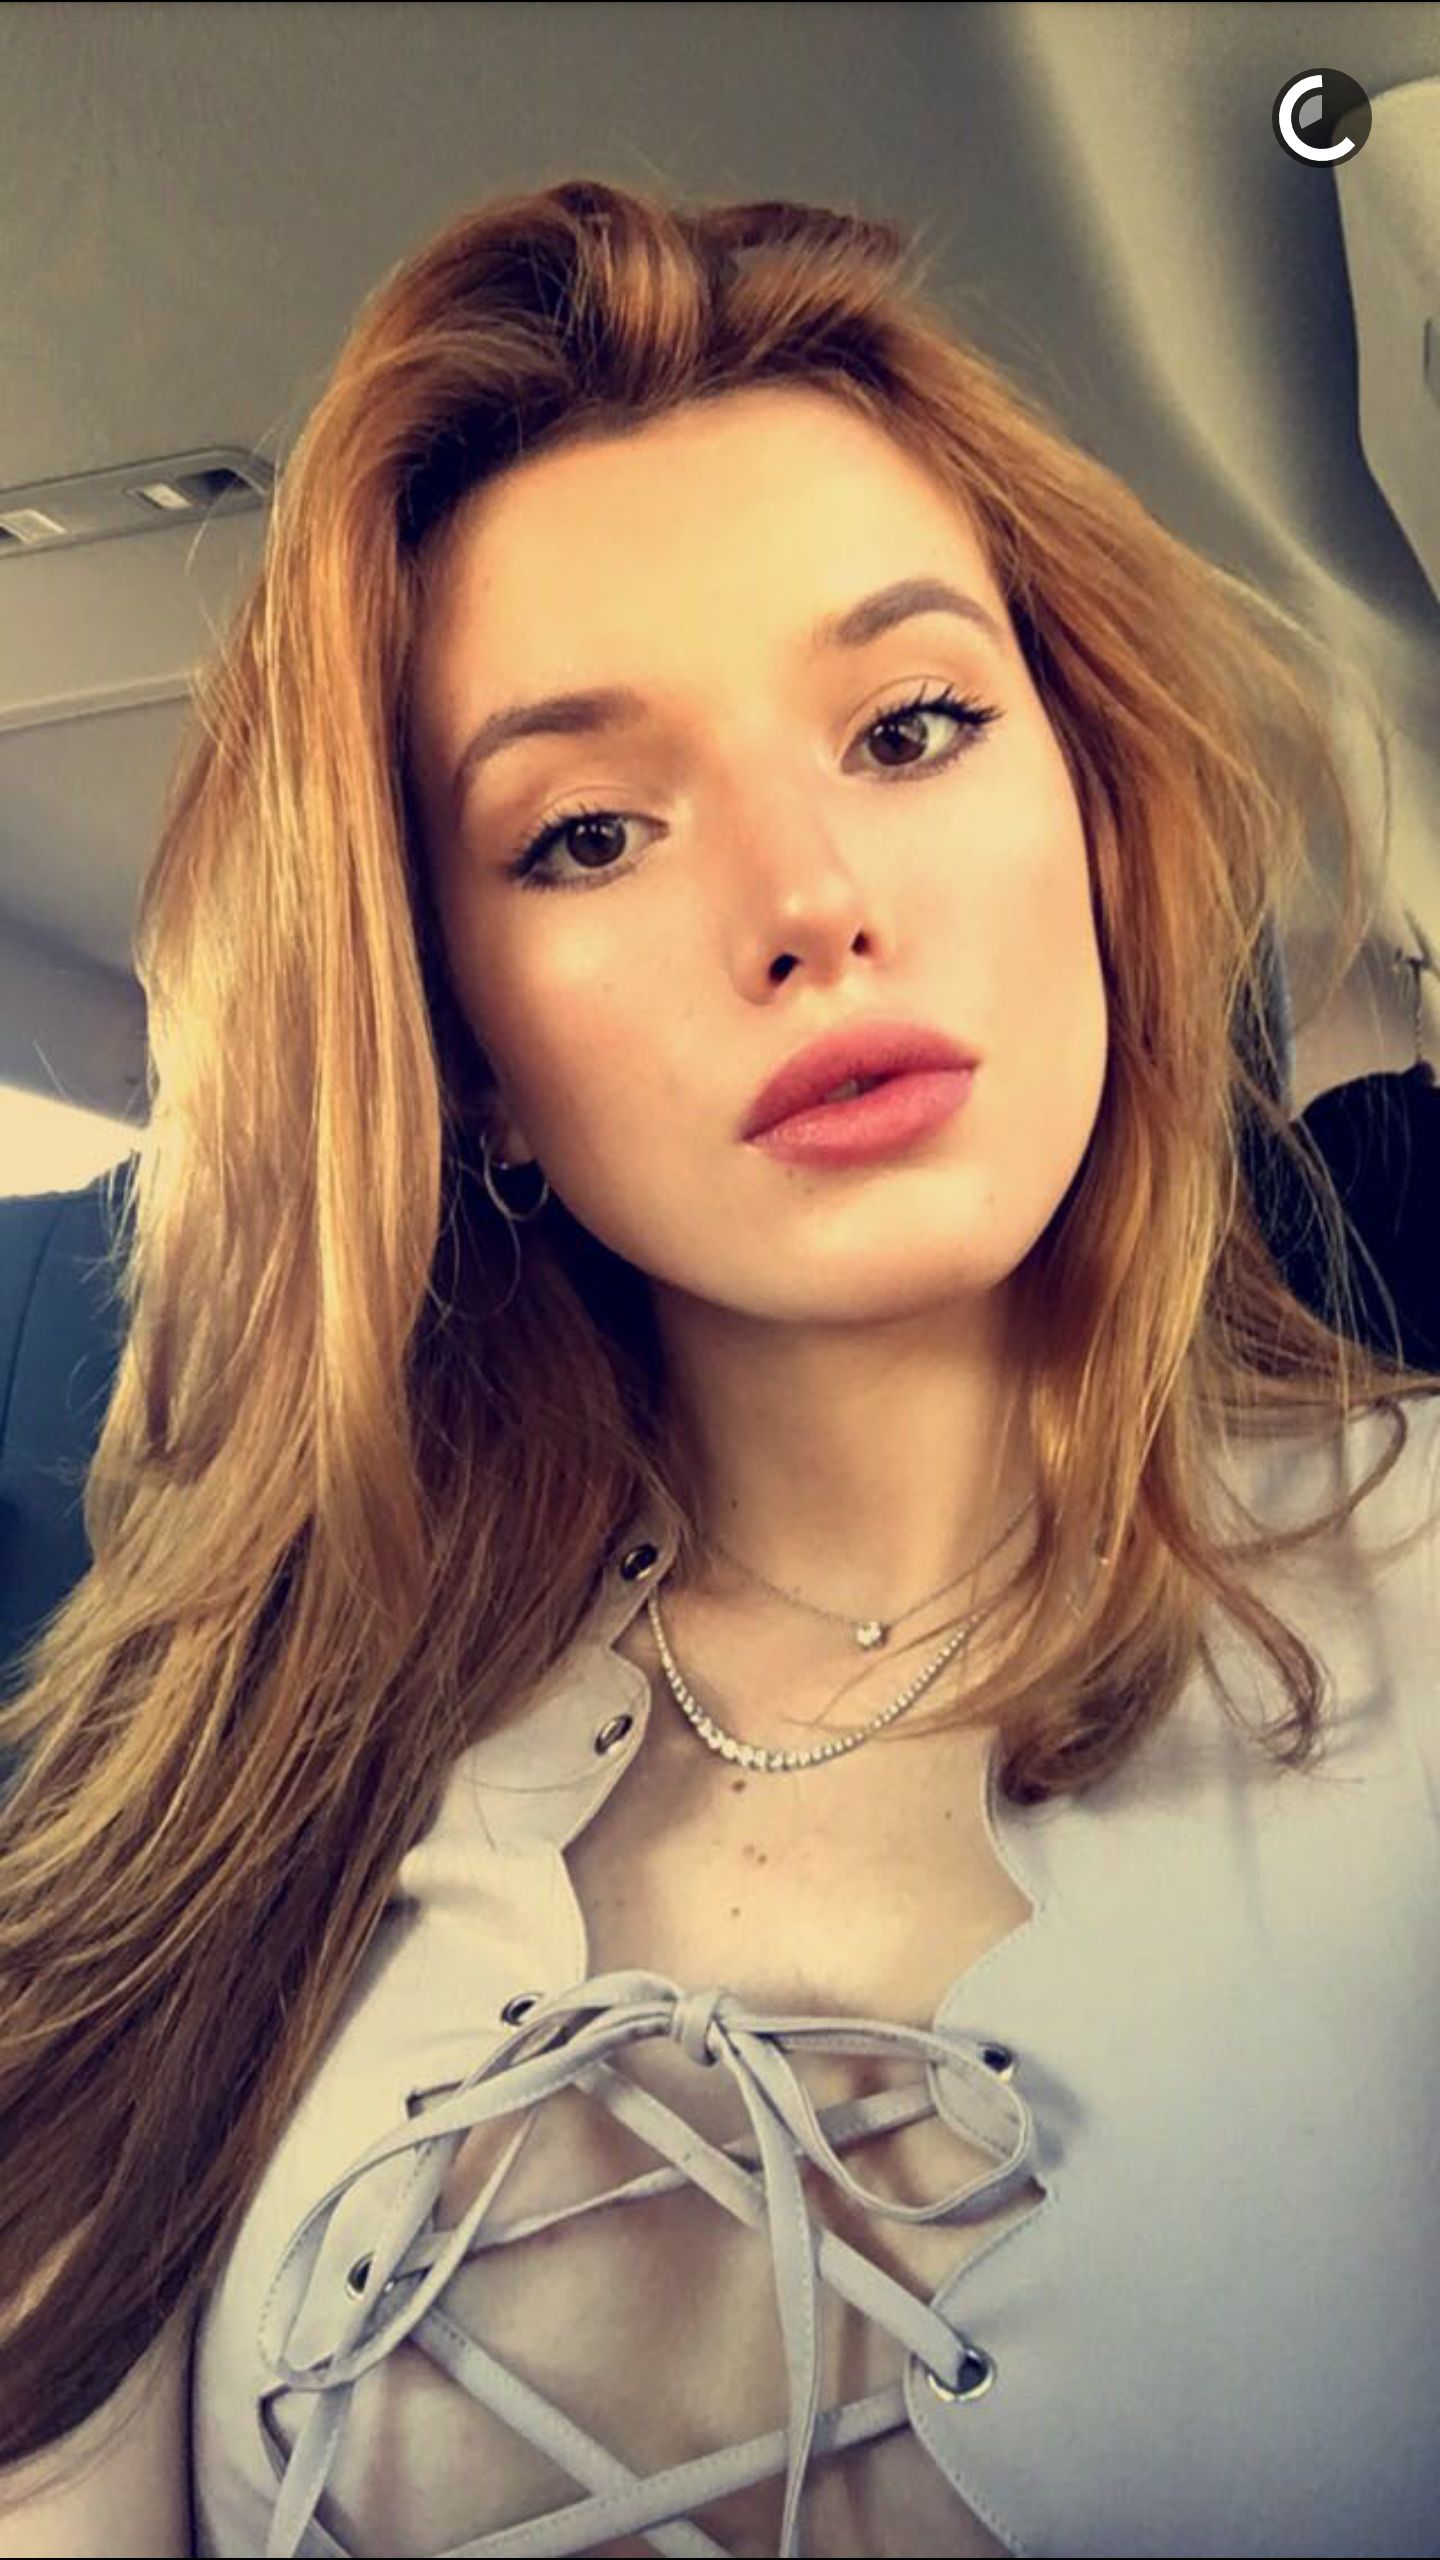 Sexy pics of Bella Thorne - The Fappening - News